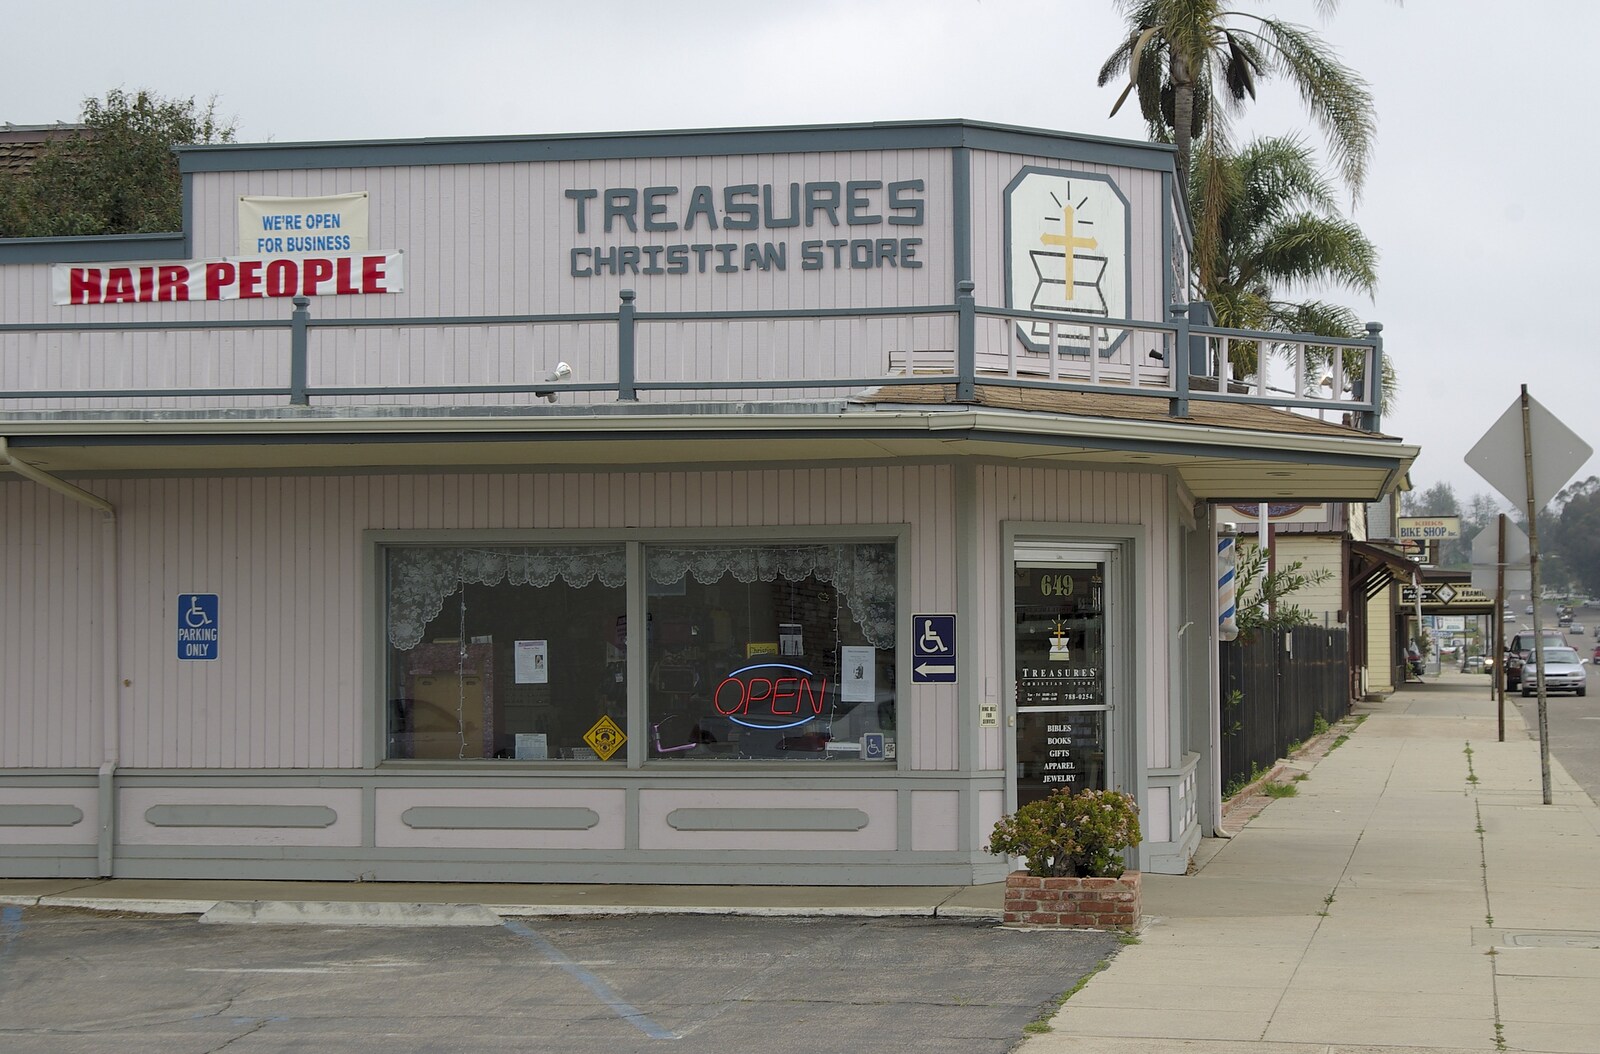 The Treasures Christian Store from San Diego 8: The Beaches of Torrey Pines, and Ramona, California, USA - 29th February 2008